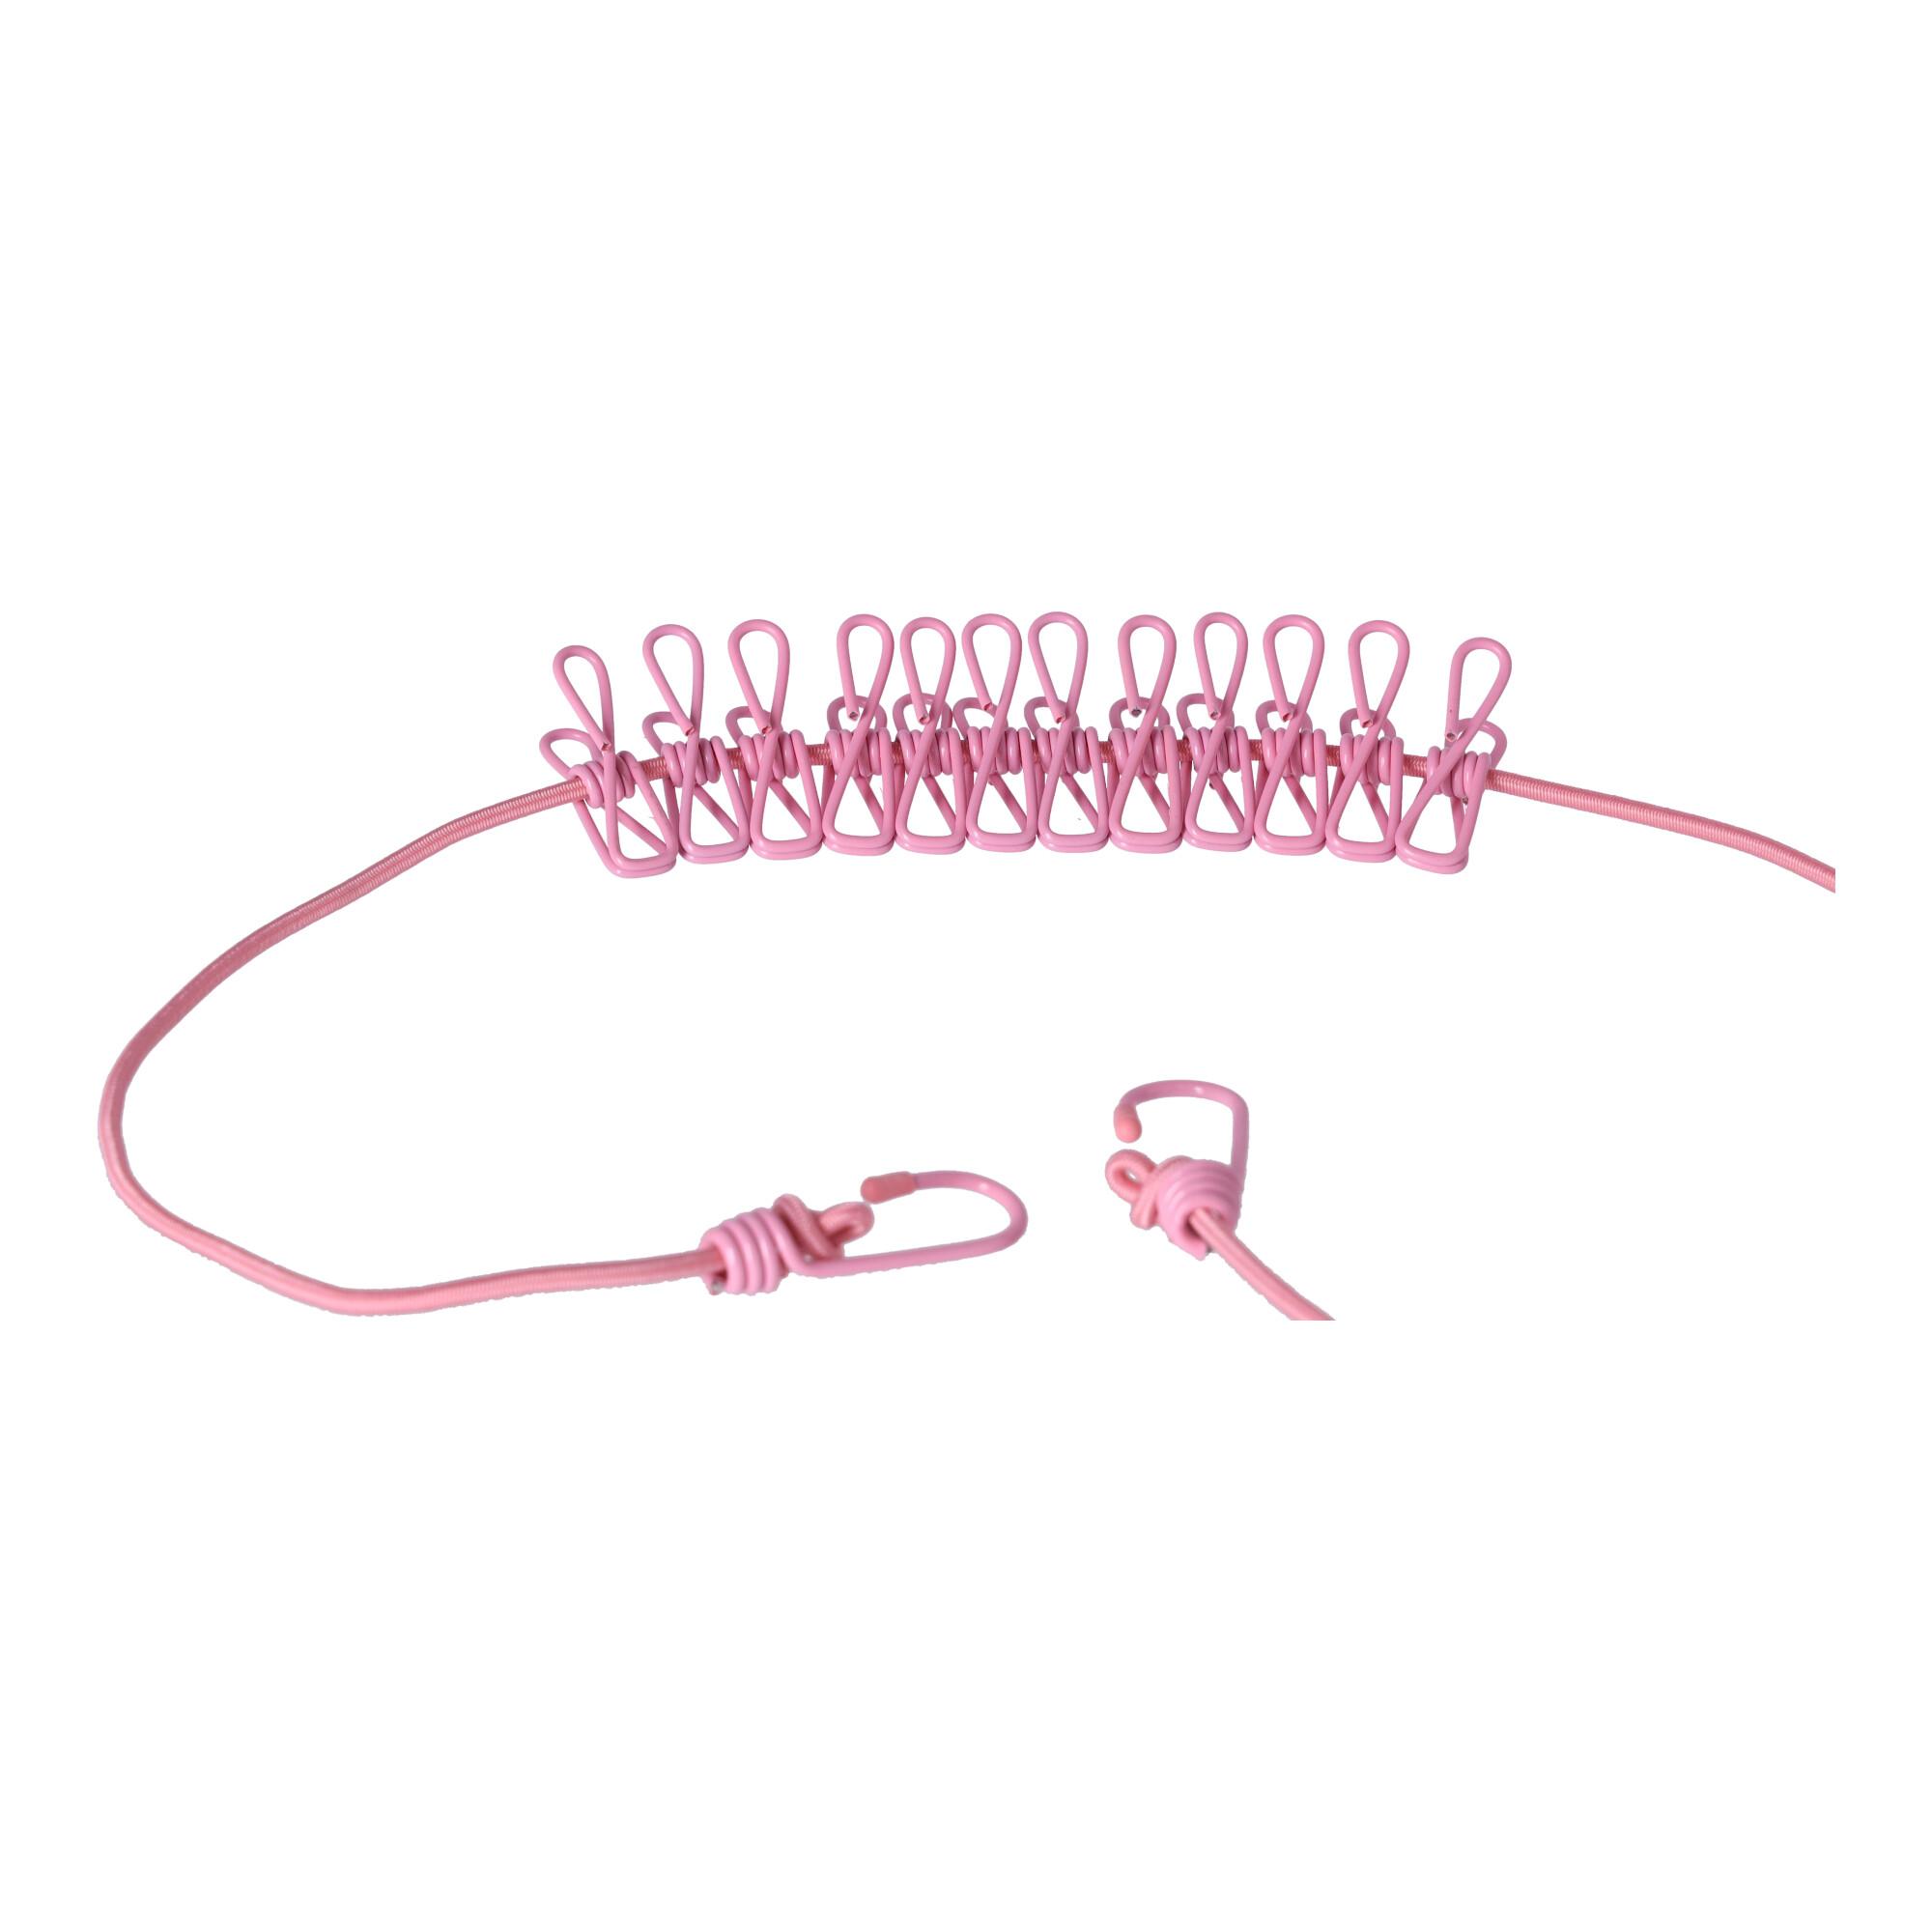 Elastic laundry rope with 12 buckles - pink